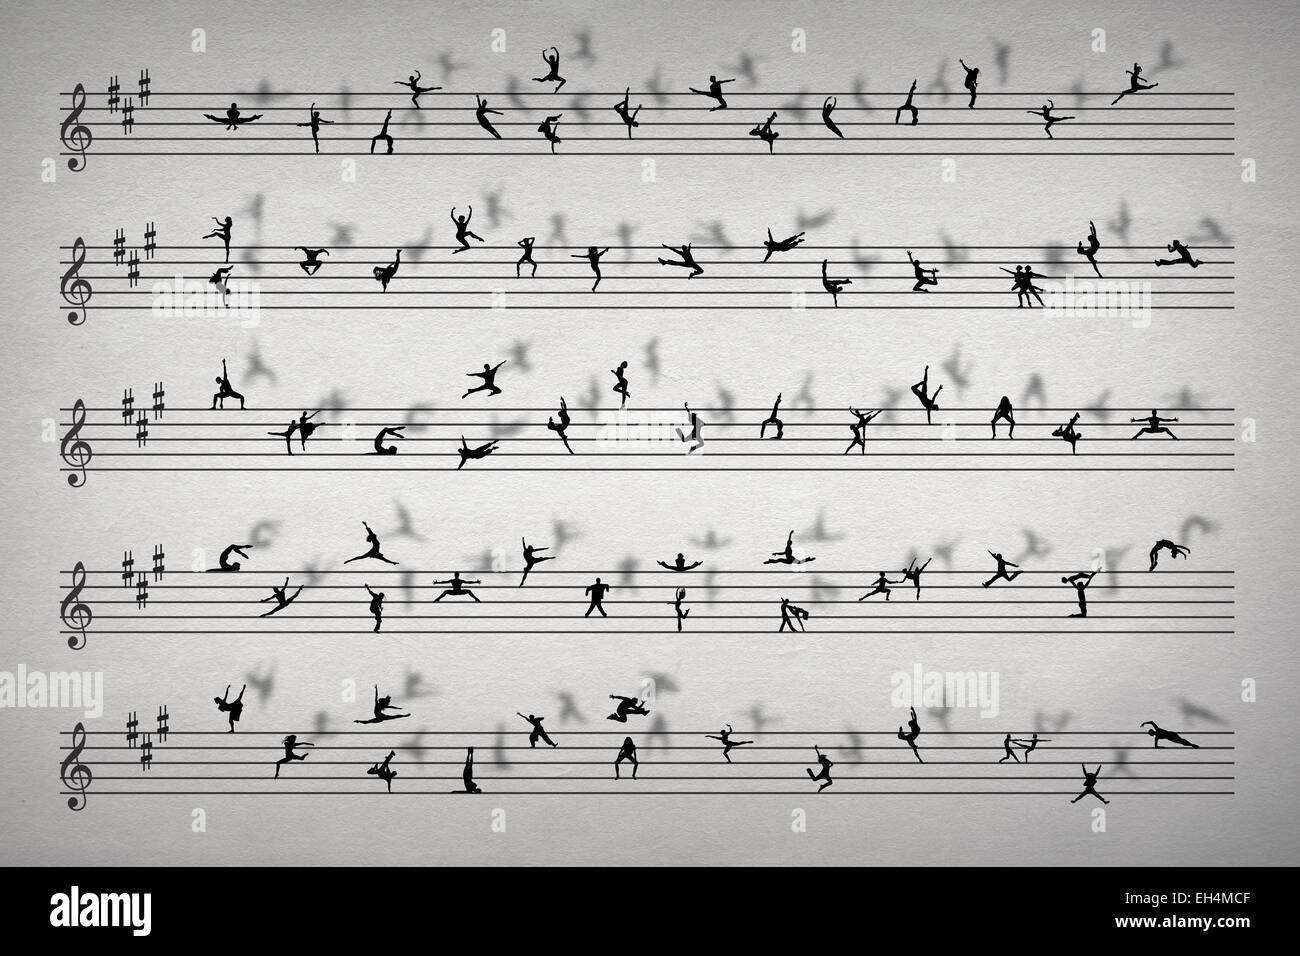 Dance Music Concept. Dancing Silhouettes As Music Notation Stock Photo